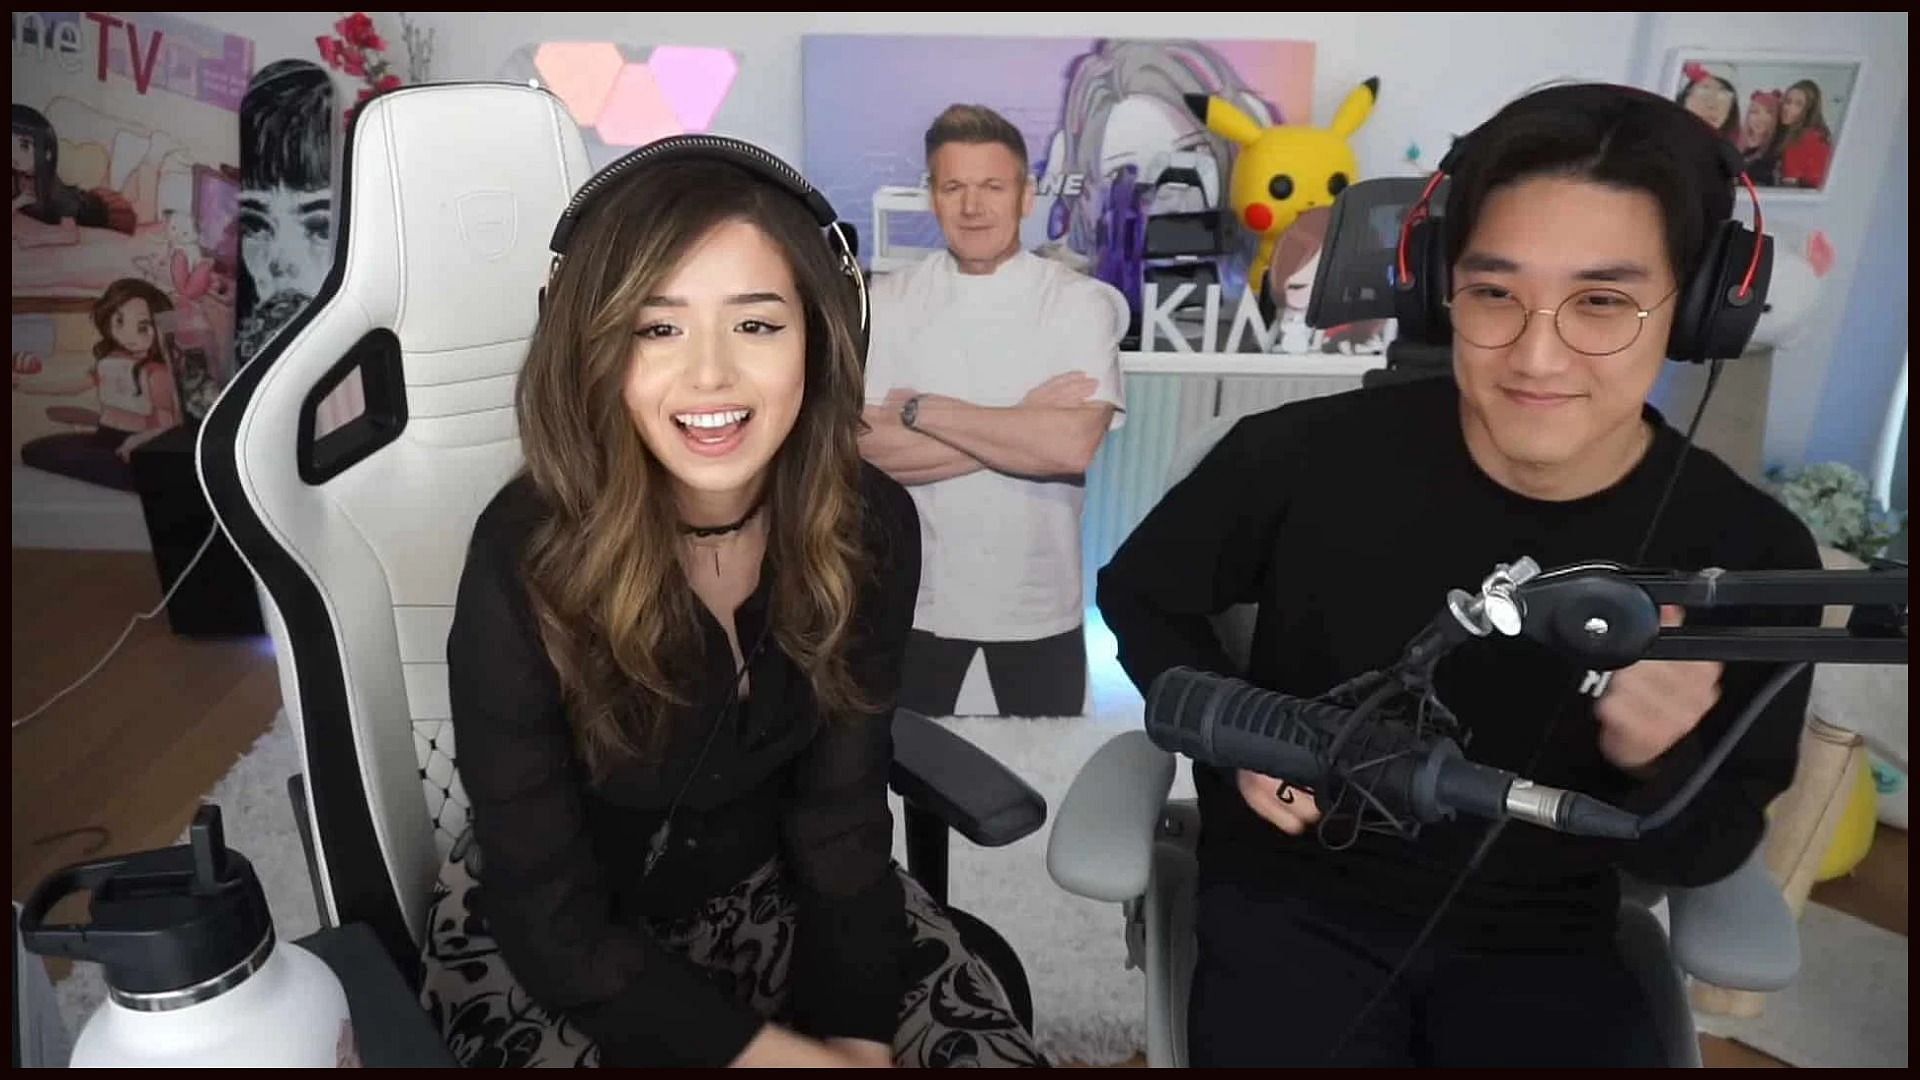 Pokimane and her rumored boyfriend Kevin have been a hot topic for some time now (Image via Twitch)